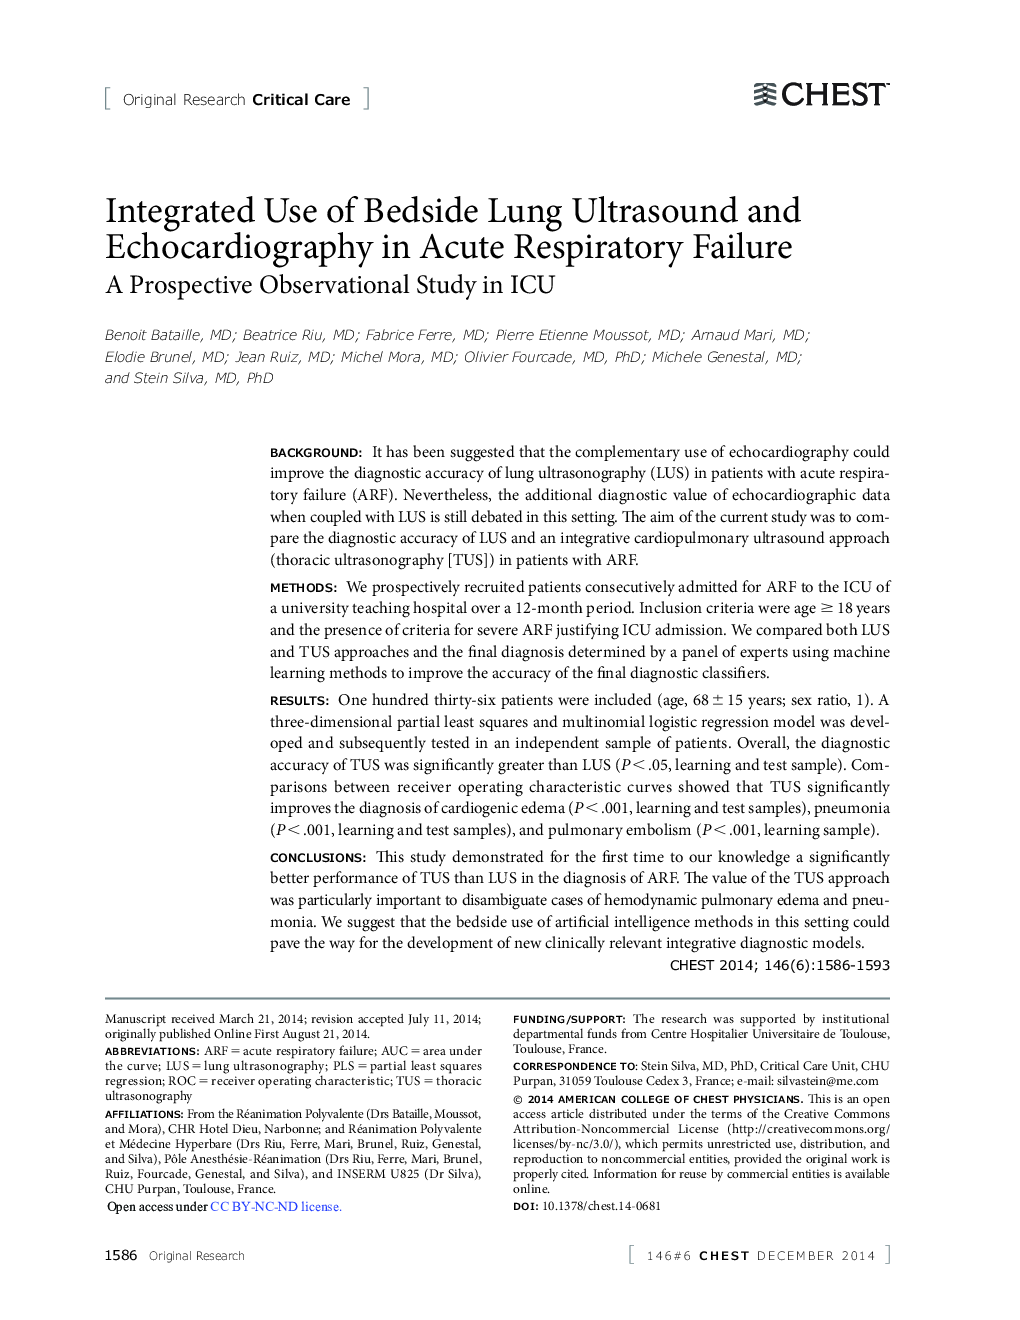 Integrated Use of Bedside Lung Ultrasound and Echocardiography in Acute Respiratory Failure